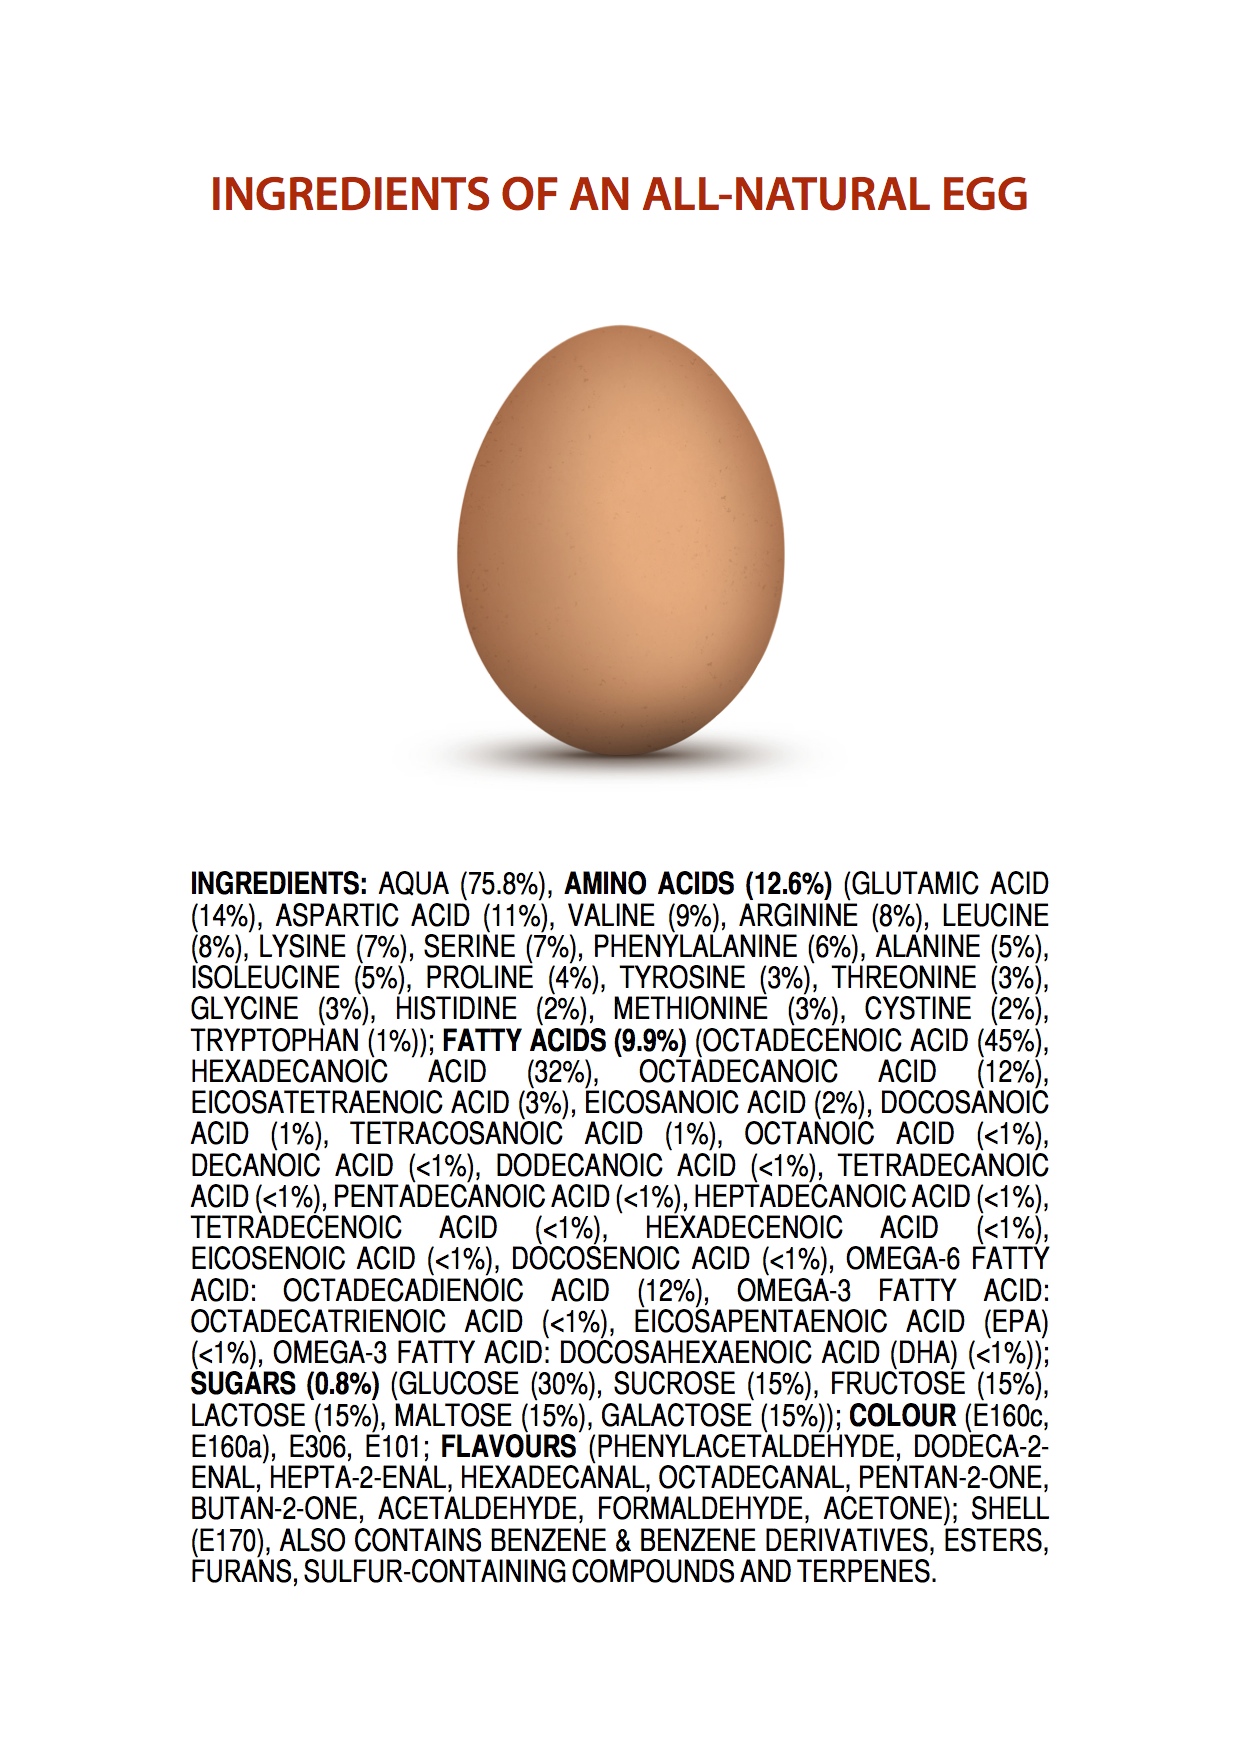 What's Actually In An Egg